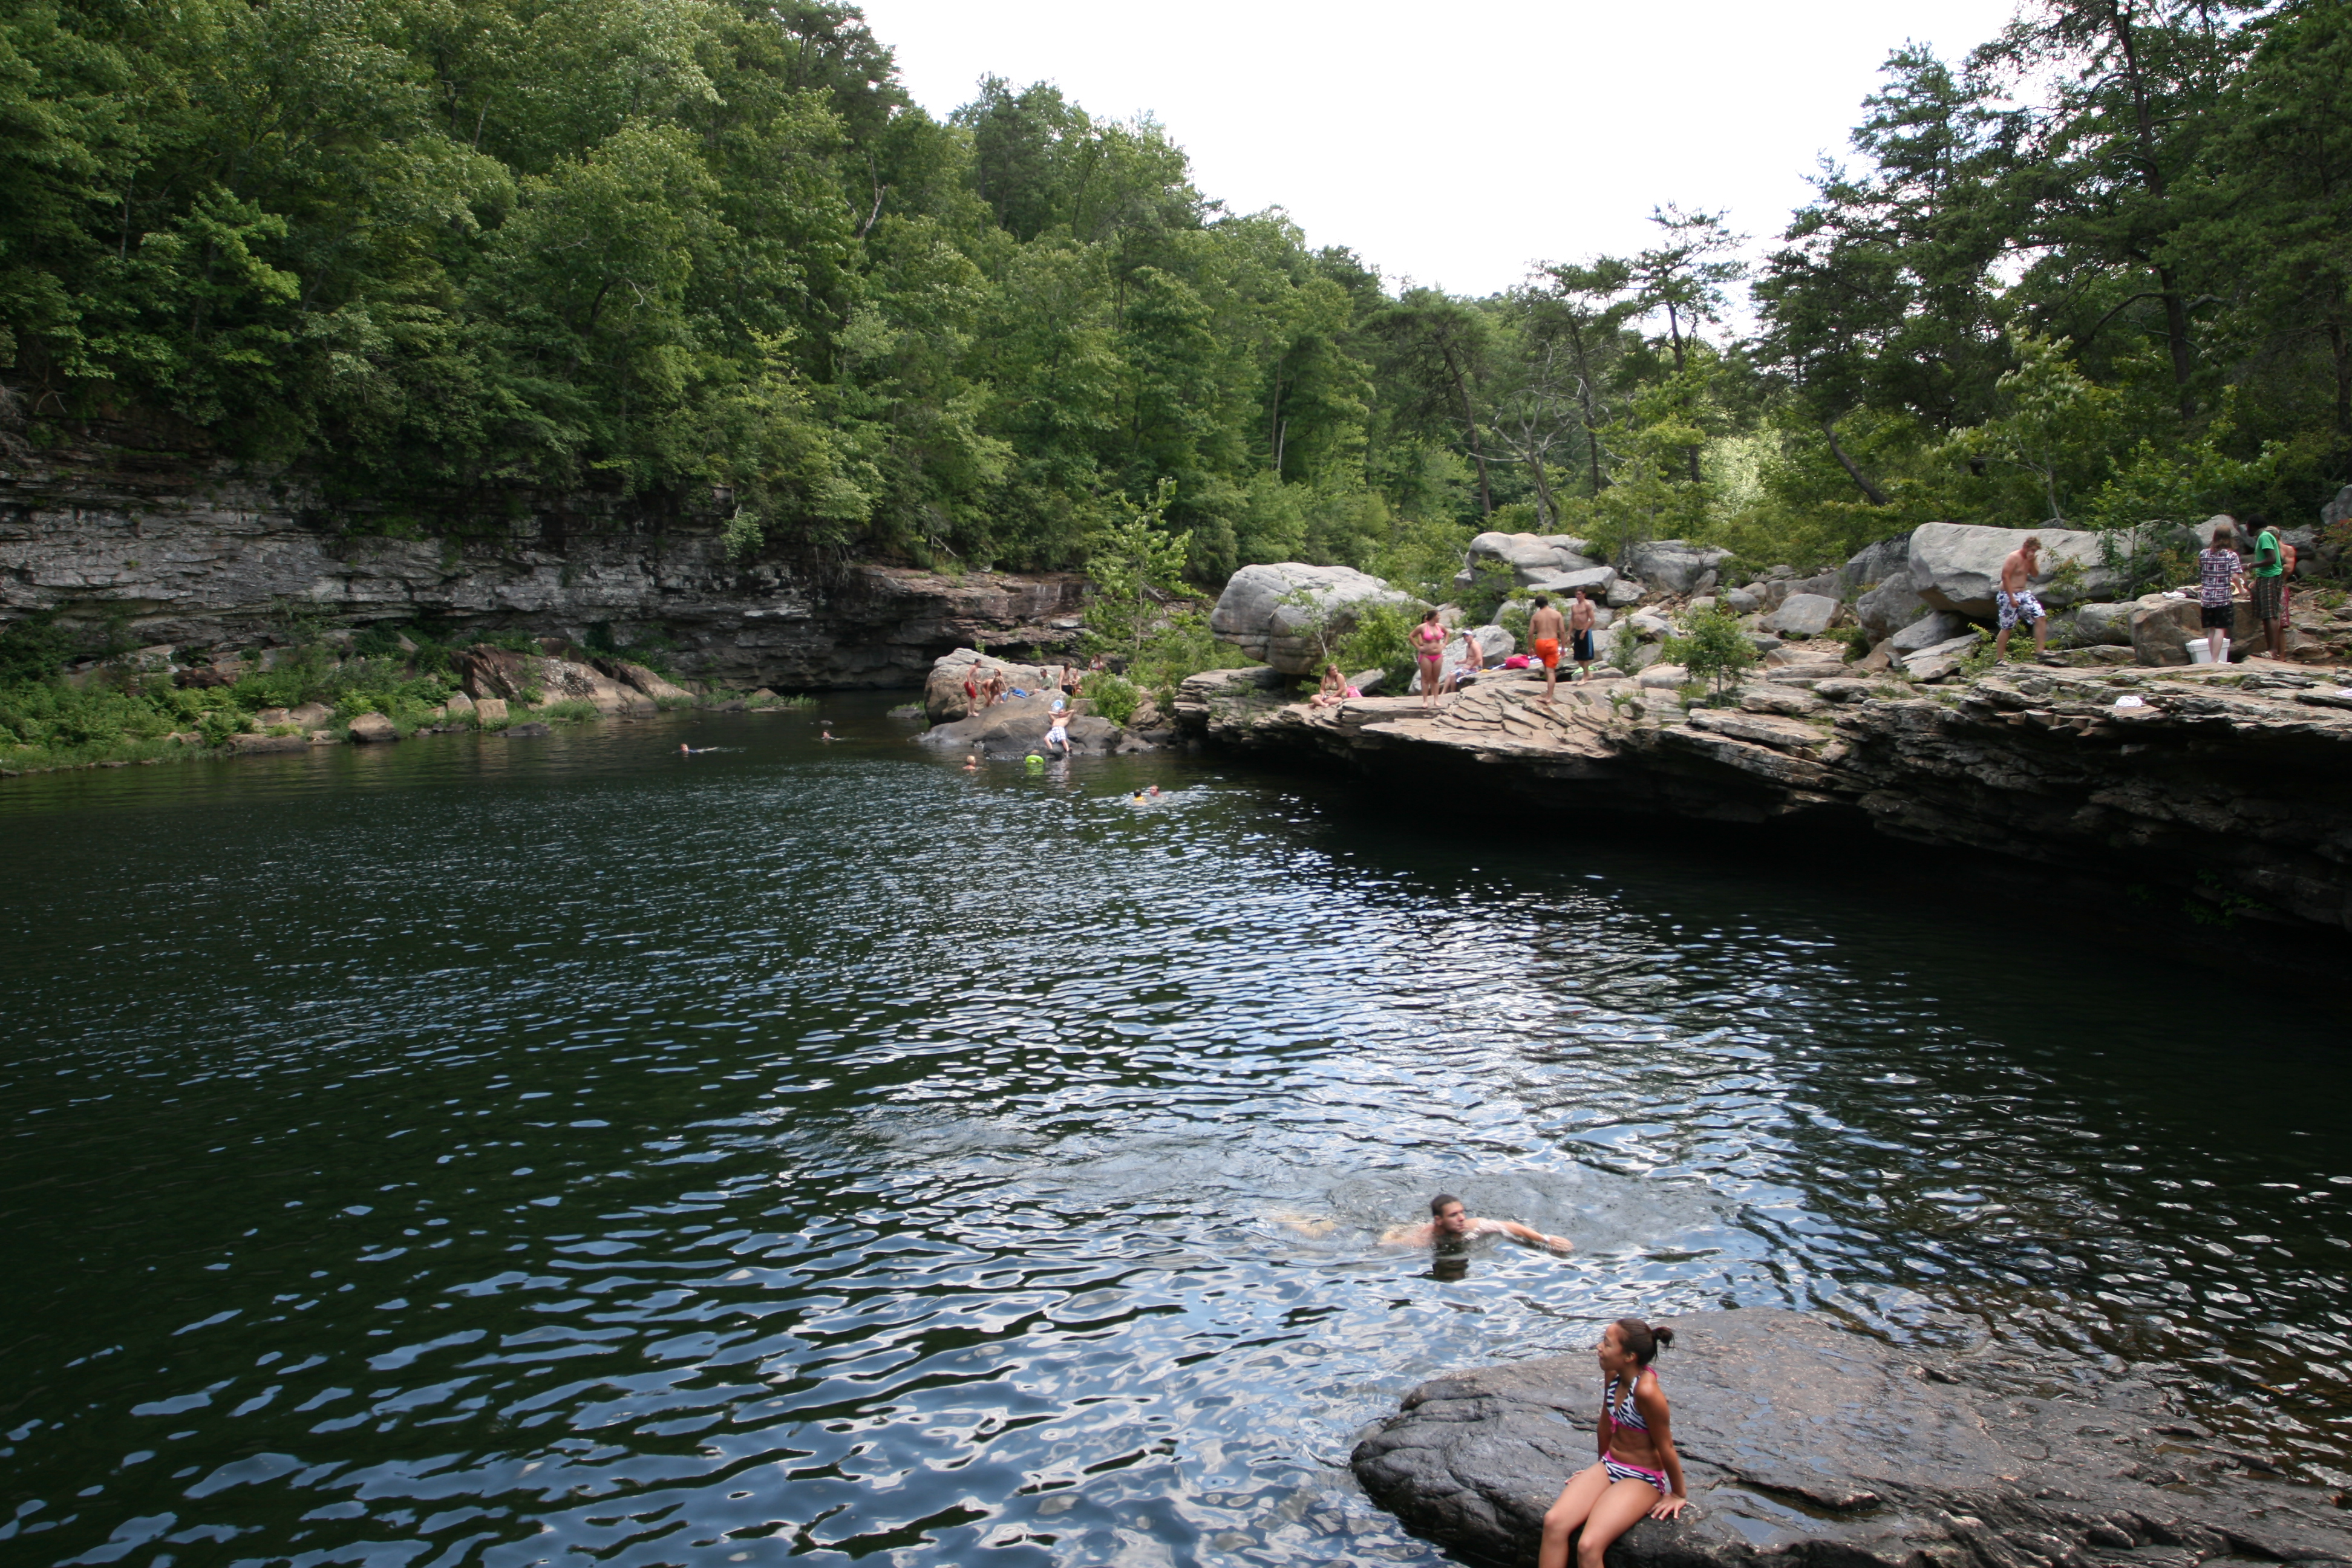 Here Are 9 Alabama Swimming Holes That Will Make Your Summer Epic.